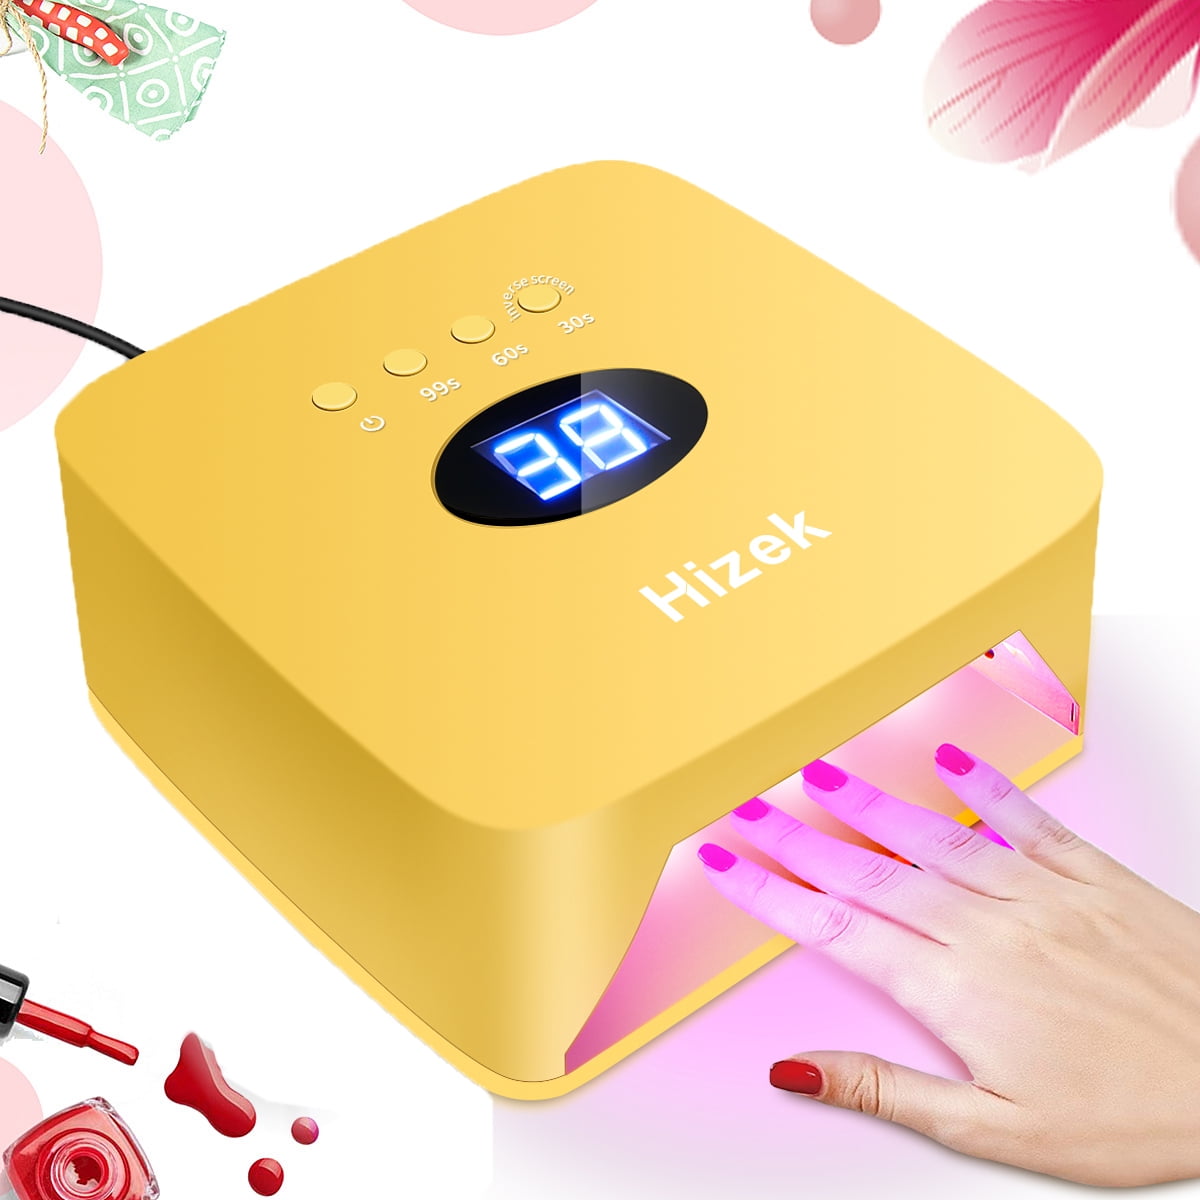 UV LED Nail Lamp, Professional 48W Rechargeable Nail Lamp Lavinda Cordless Wireless Nail Dryer with Removable Metal Bottom, Large Space Nail Curing